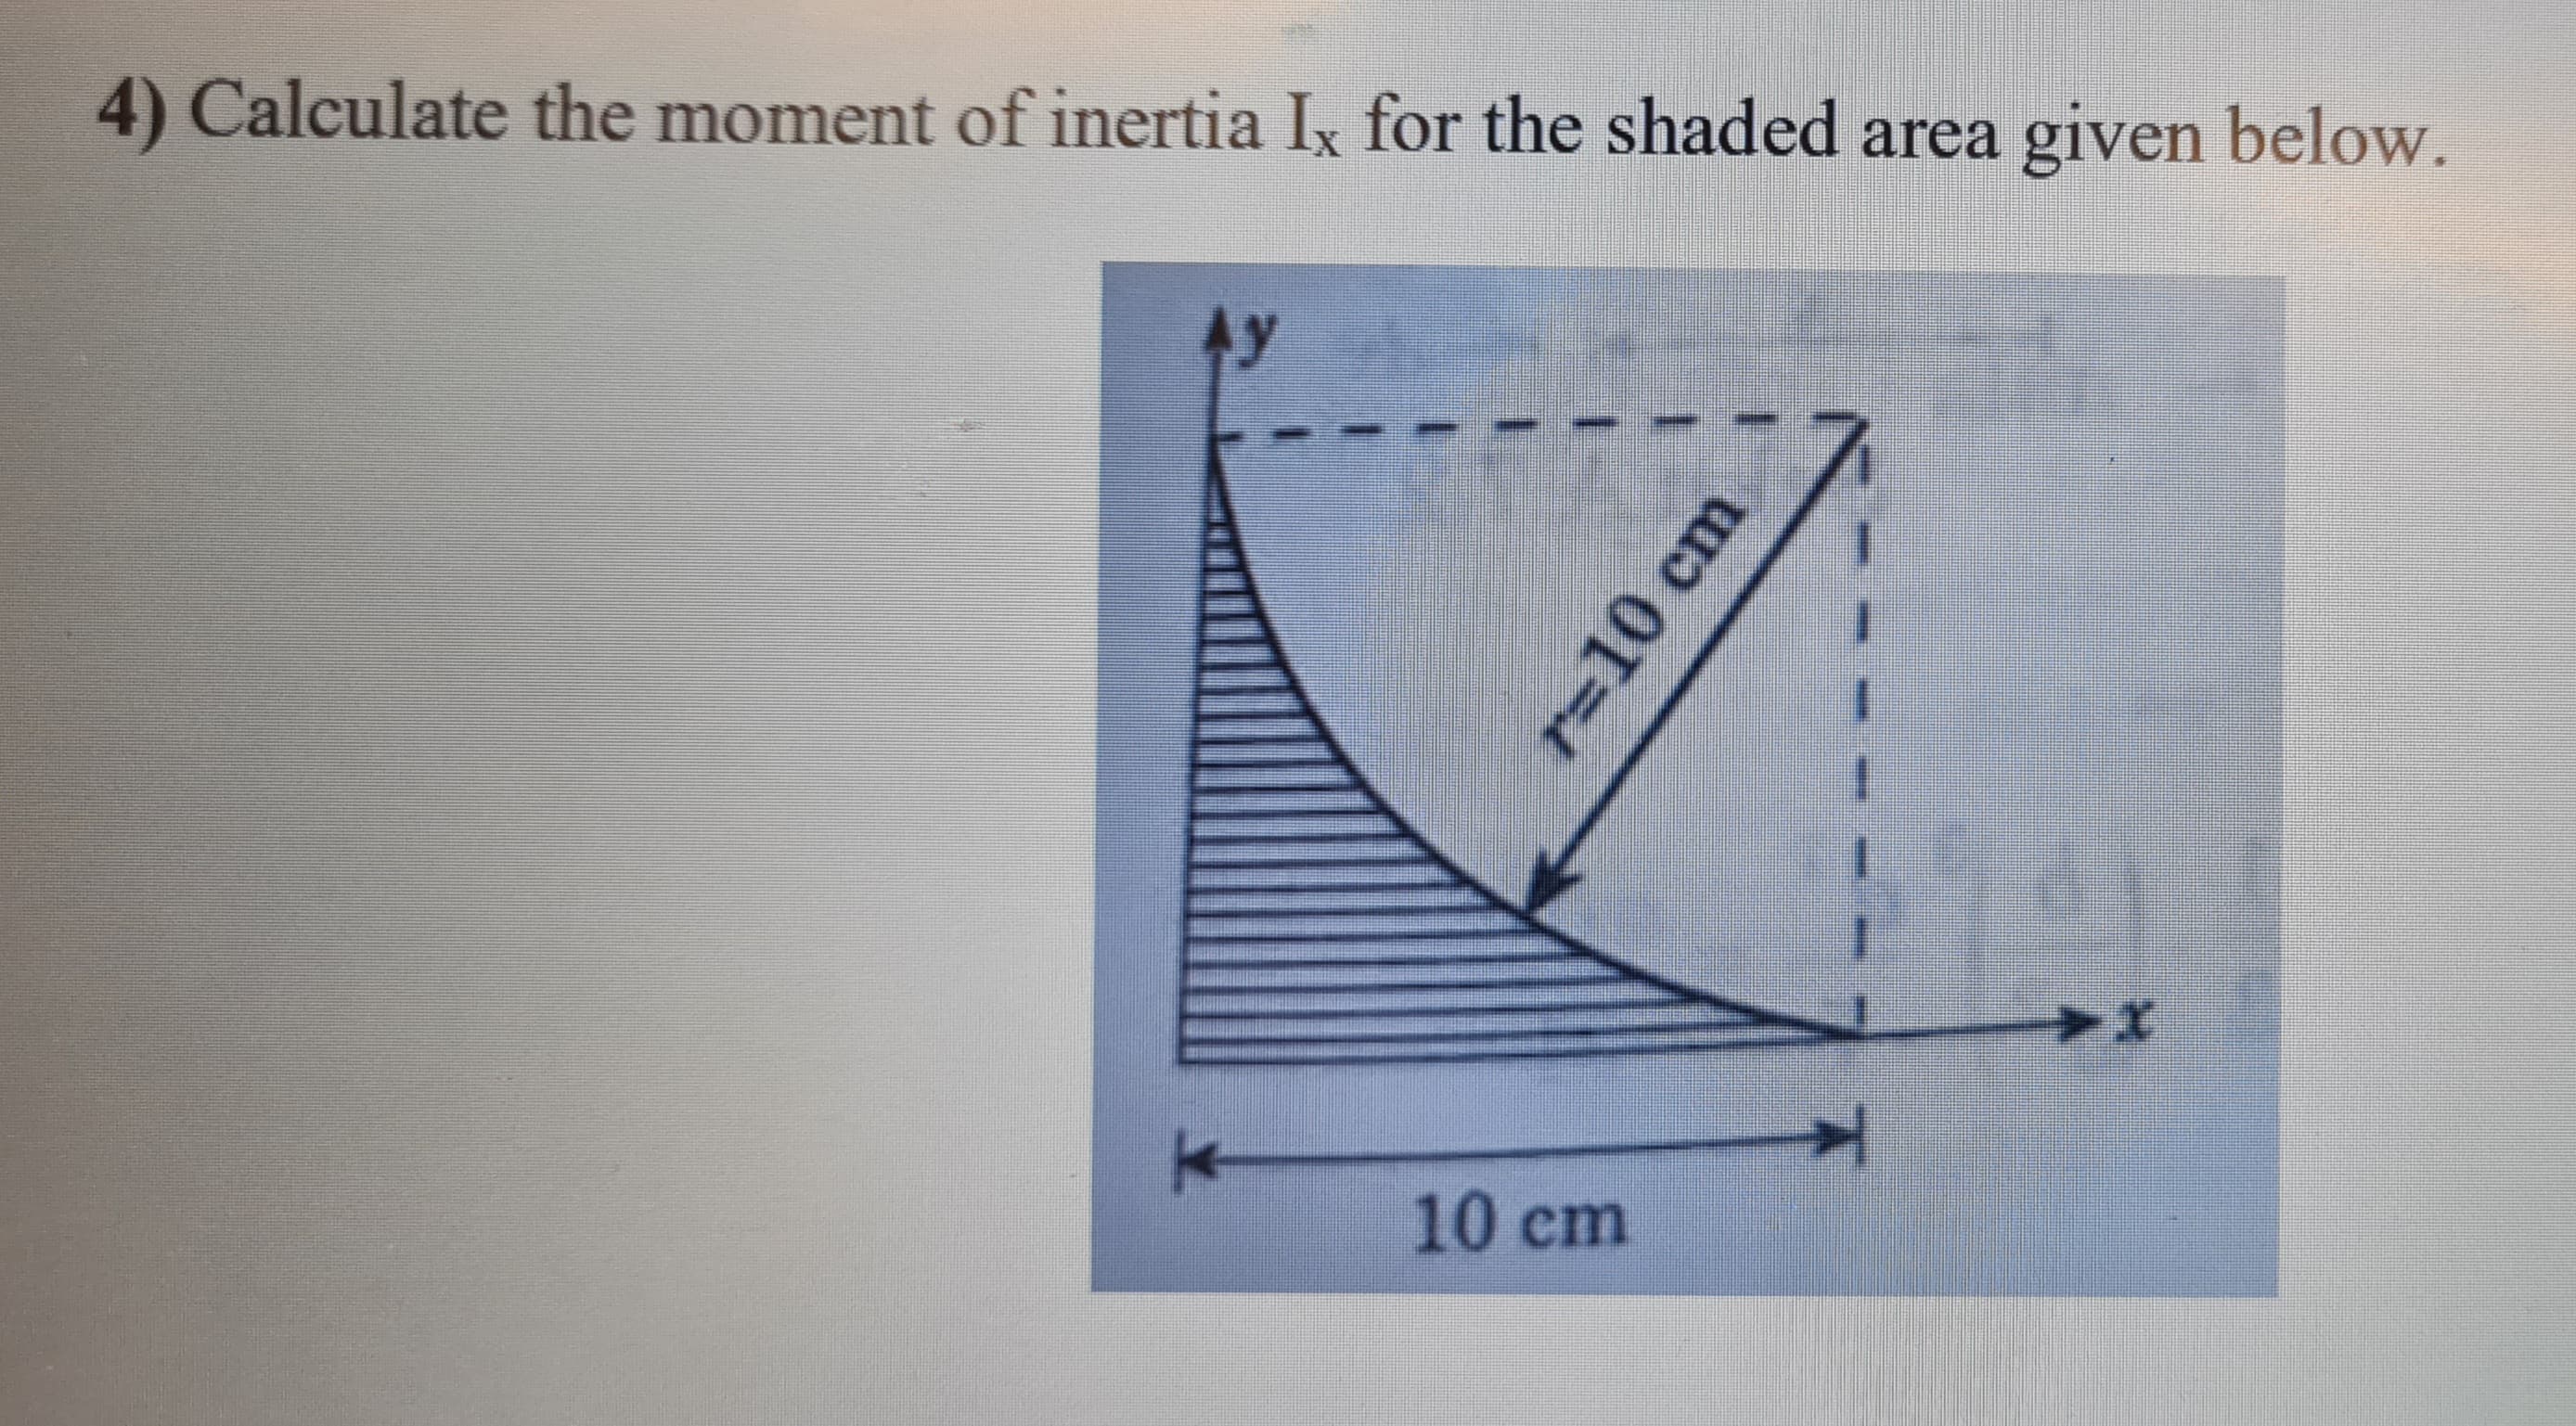 4) Calculate the moment of inertia Ix for the shaded area given below.
Ay
10 cm
r=10 cm
19
➤x